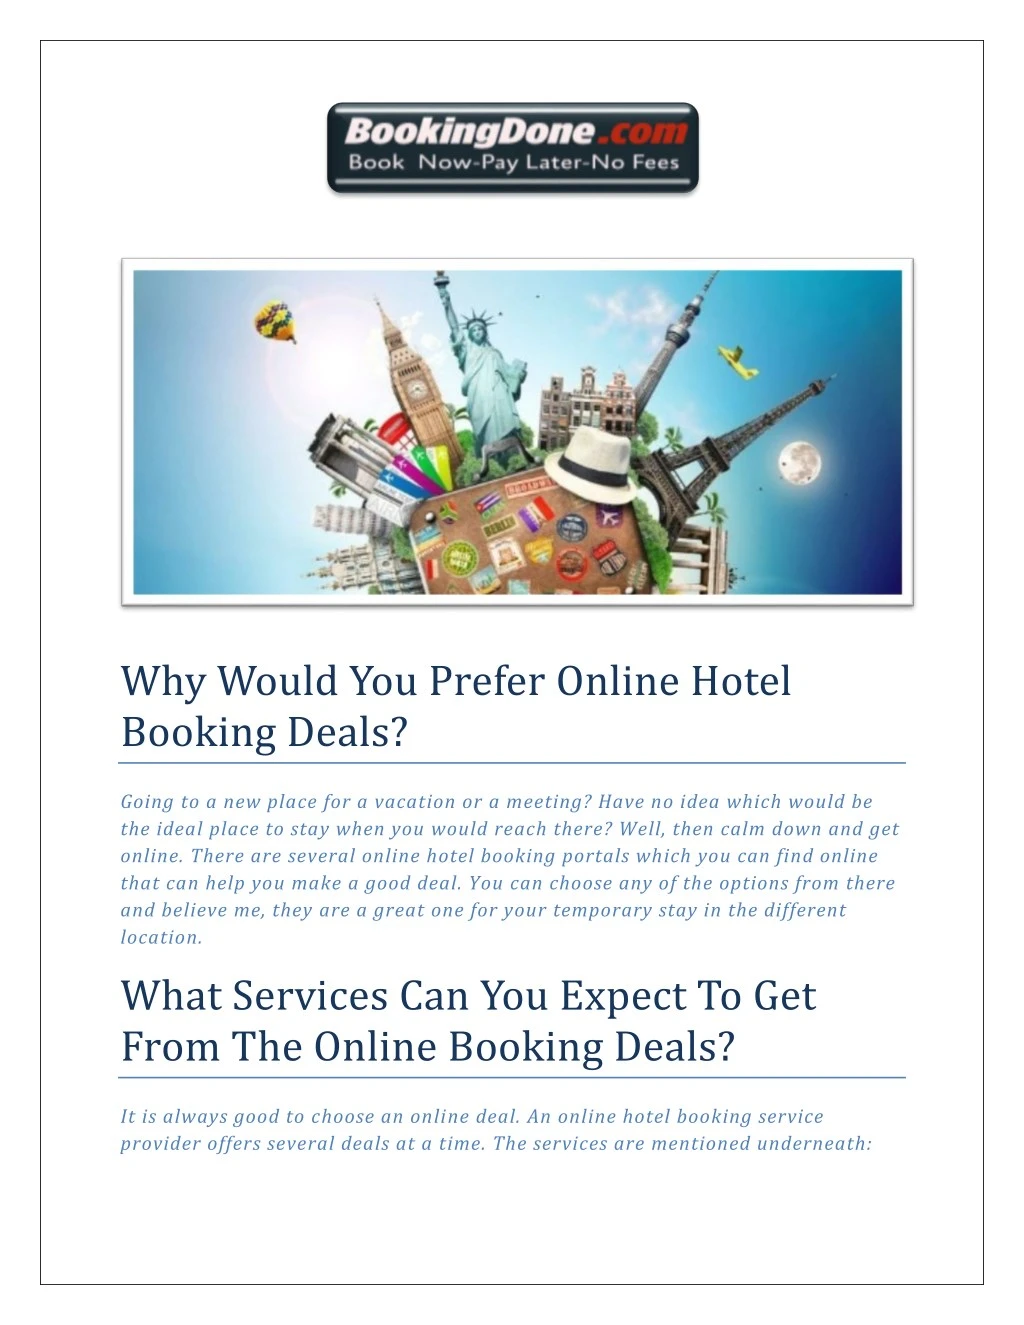 why would you prefer online hotel booking deals